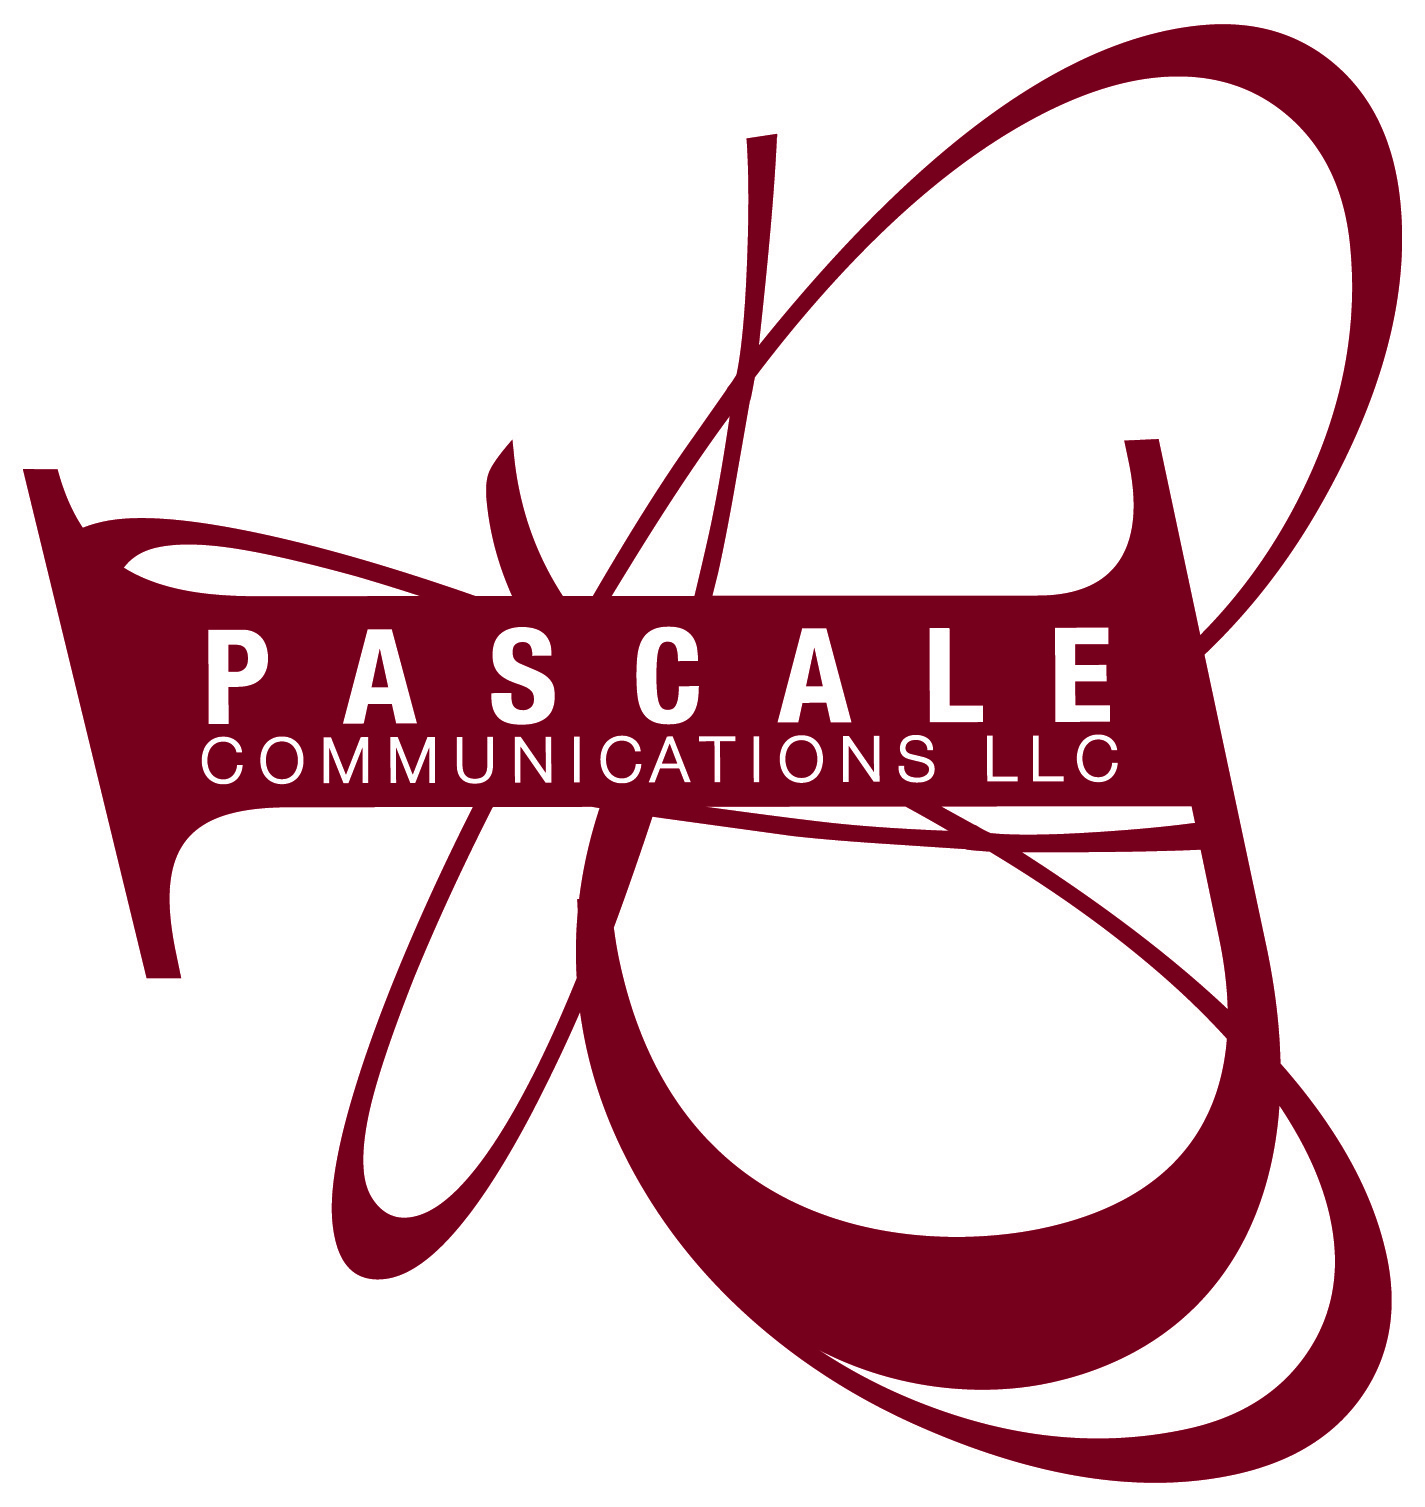 Georgette Pascale - Logo - https://s39939.pcdn.co/wp-content/uploads/2018/03/PASACLE-COMMUNICATIONS-LOGO.jpg